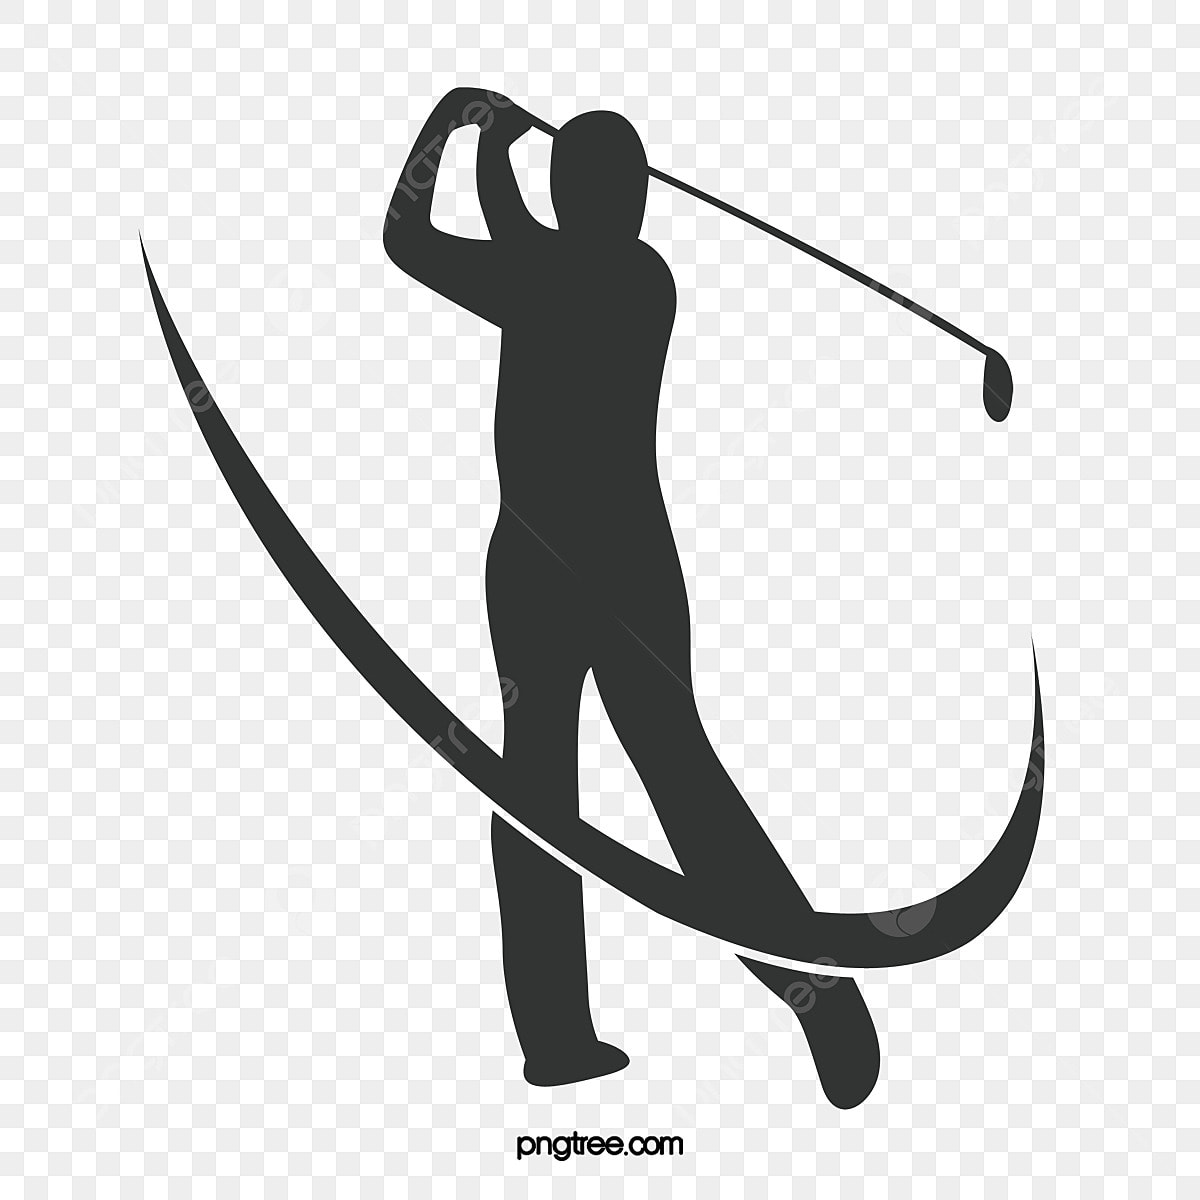 golf images clipart